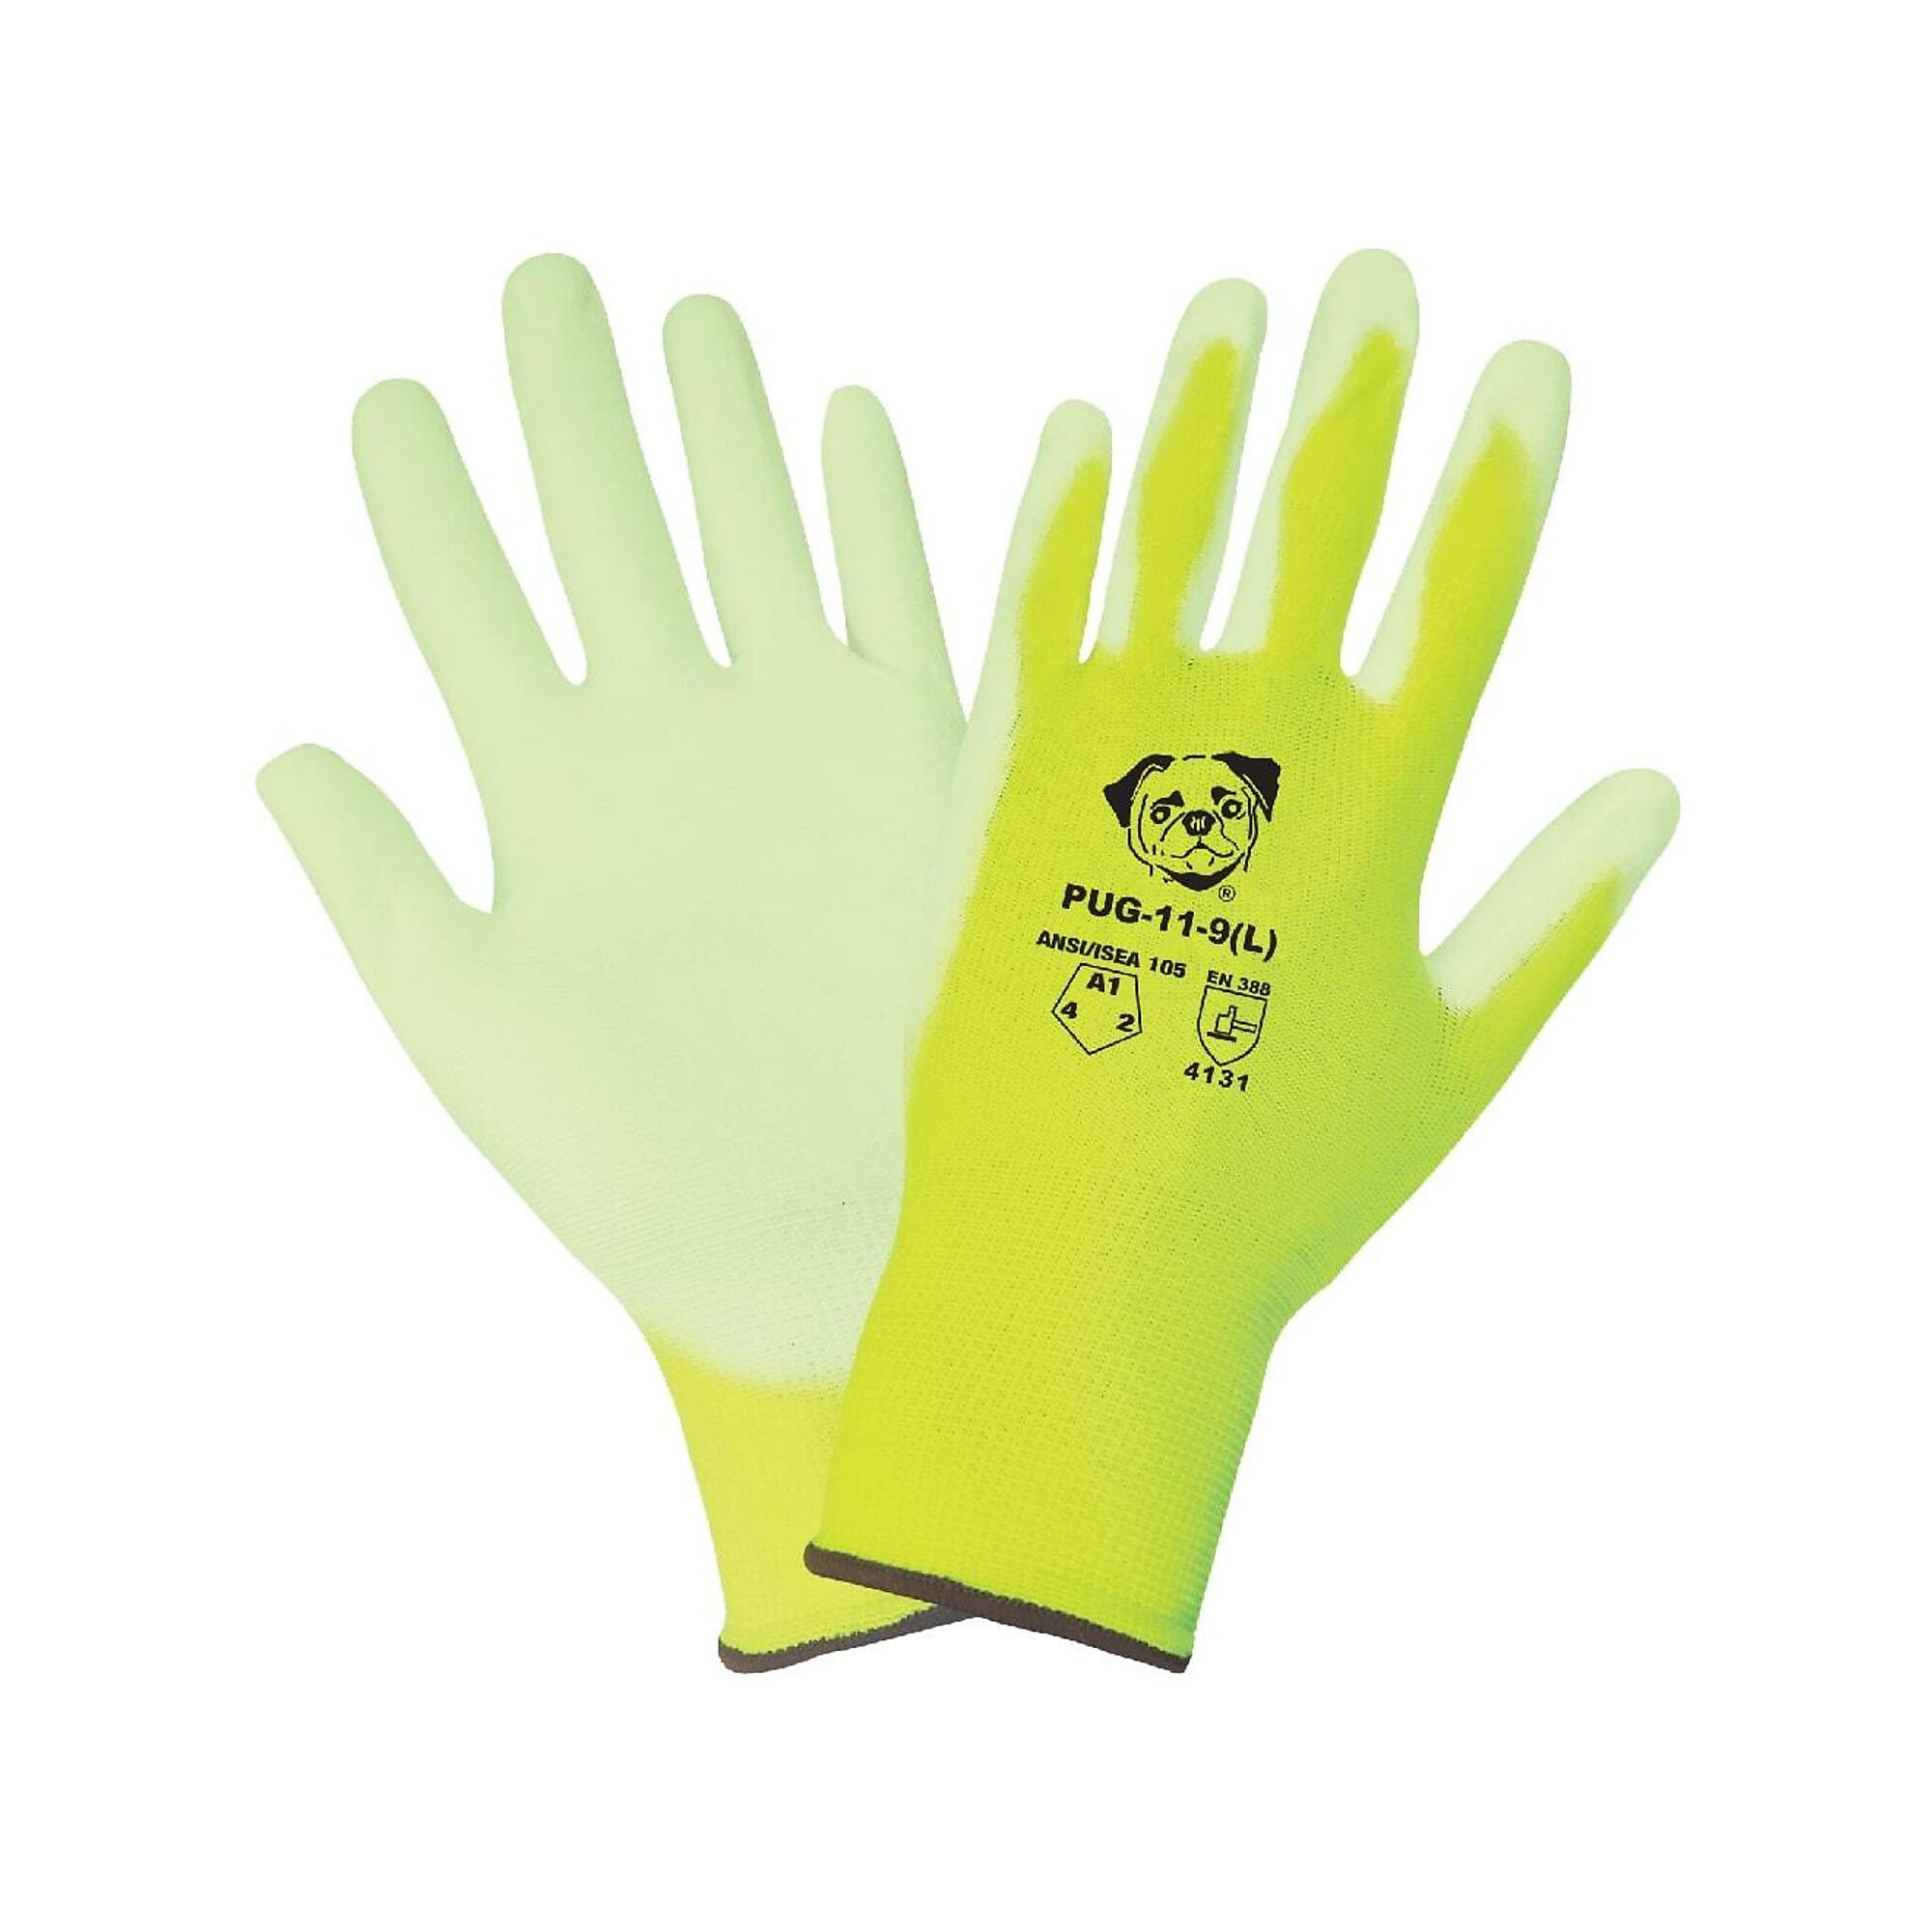 Global Glove PUG , HV Y/G, Poly Coated, Cut Resistant A1 Gloves - 12 Pairs, Size 2XL, Color High-Visibility Yellow/Green, Included (qty.) 12 Model PUG